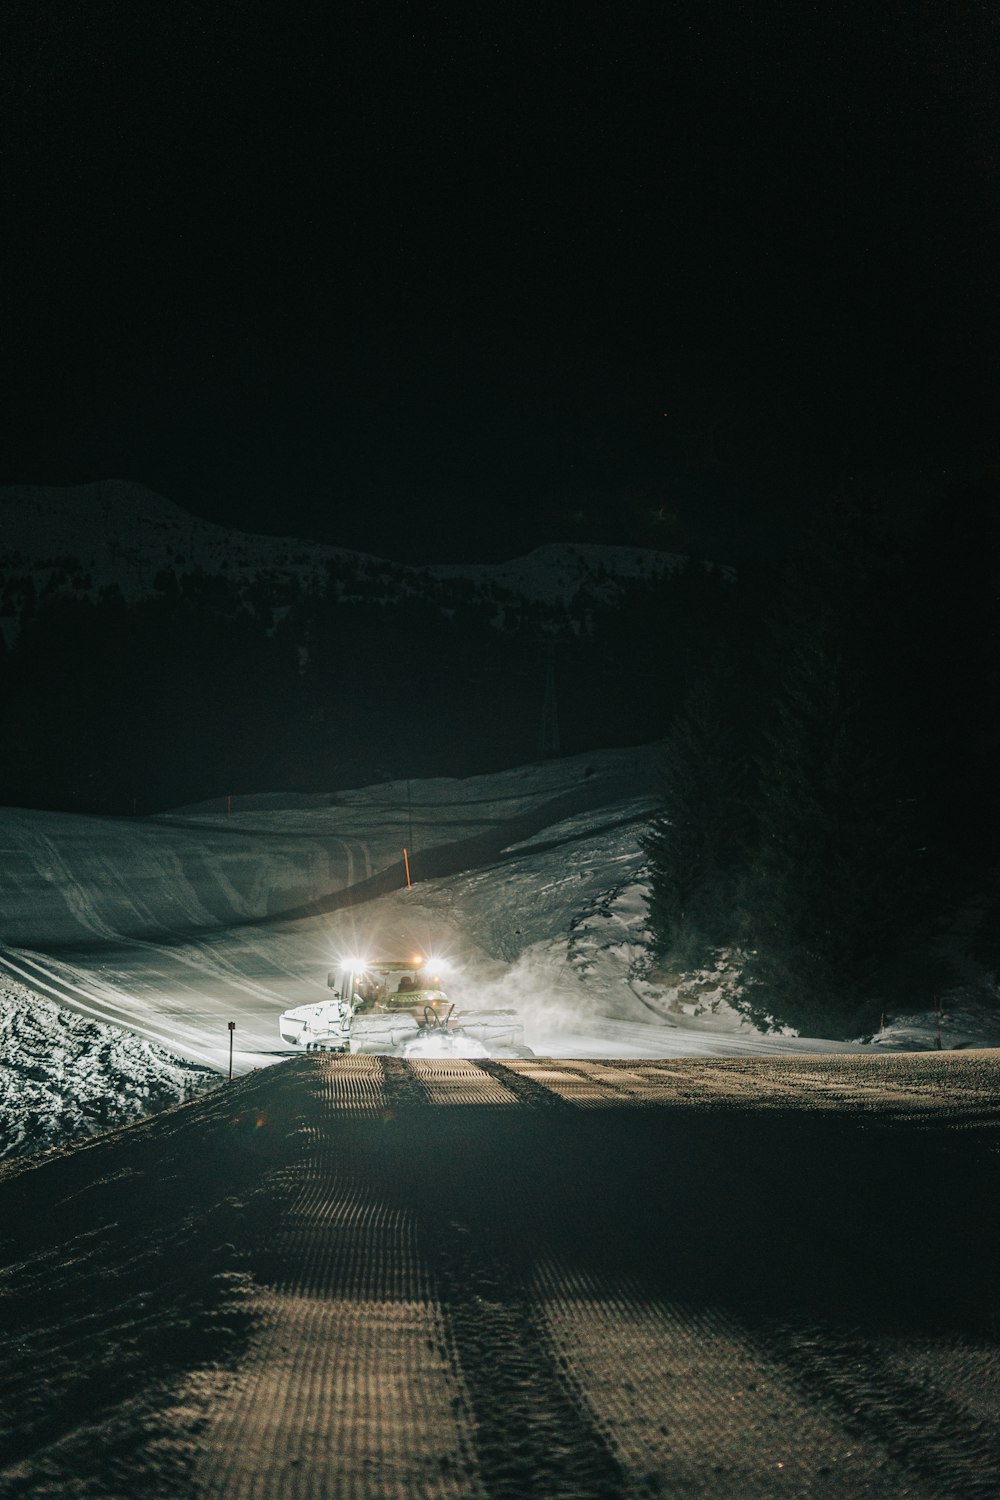 snow covered road during night time